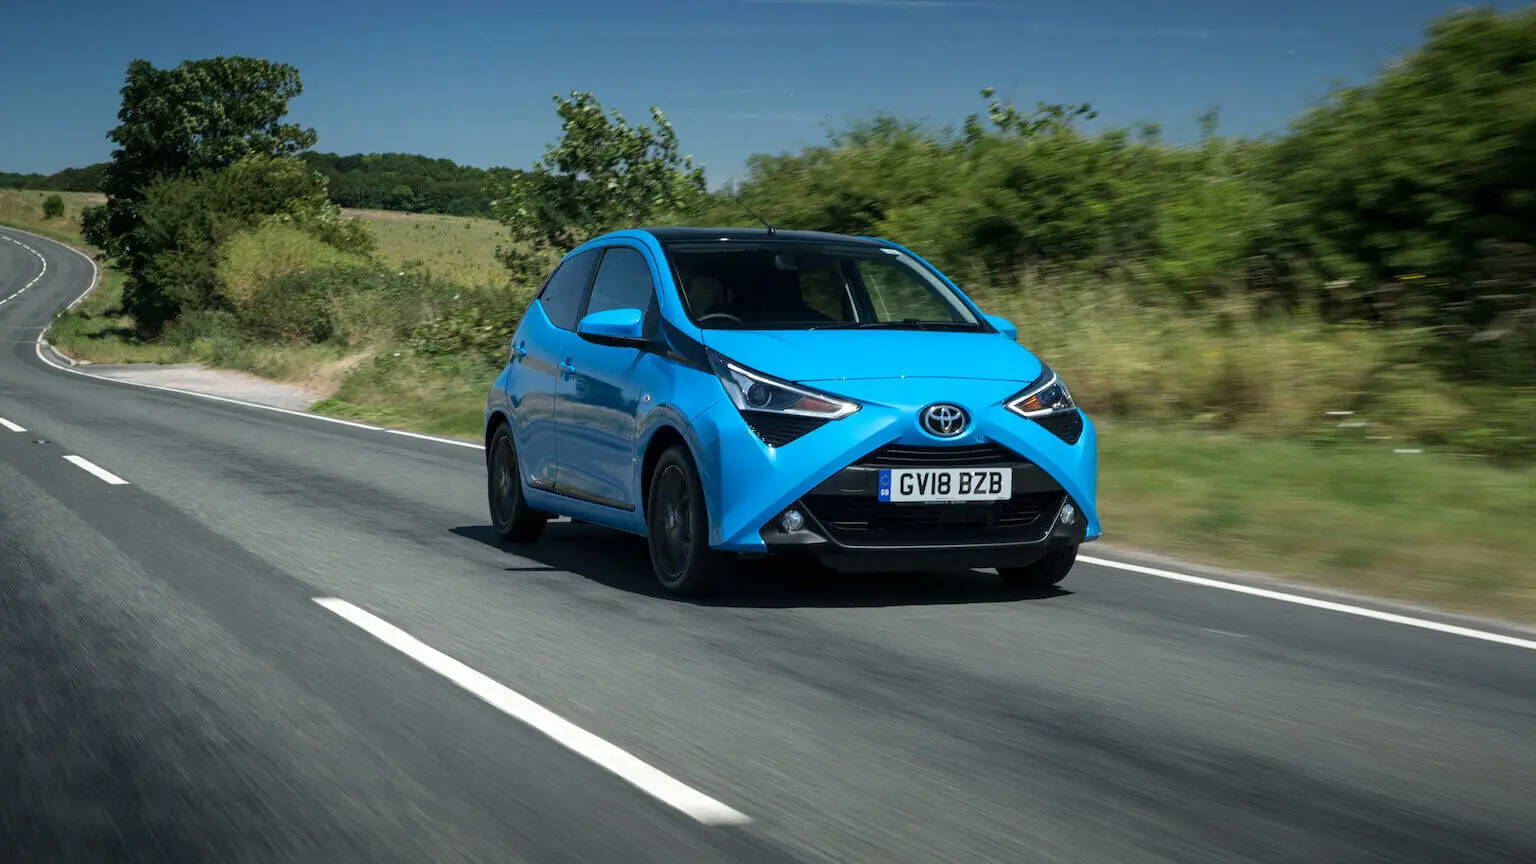 Toyota Aygo insurance group & cost 2020 | Finder UK